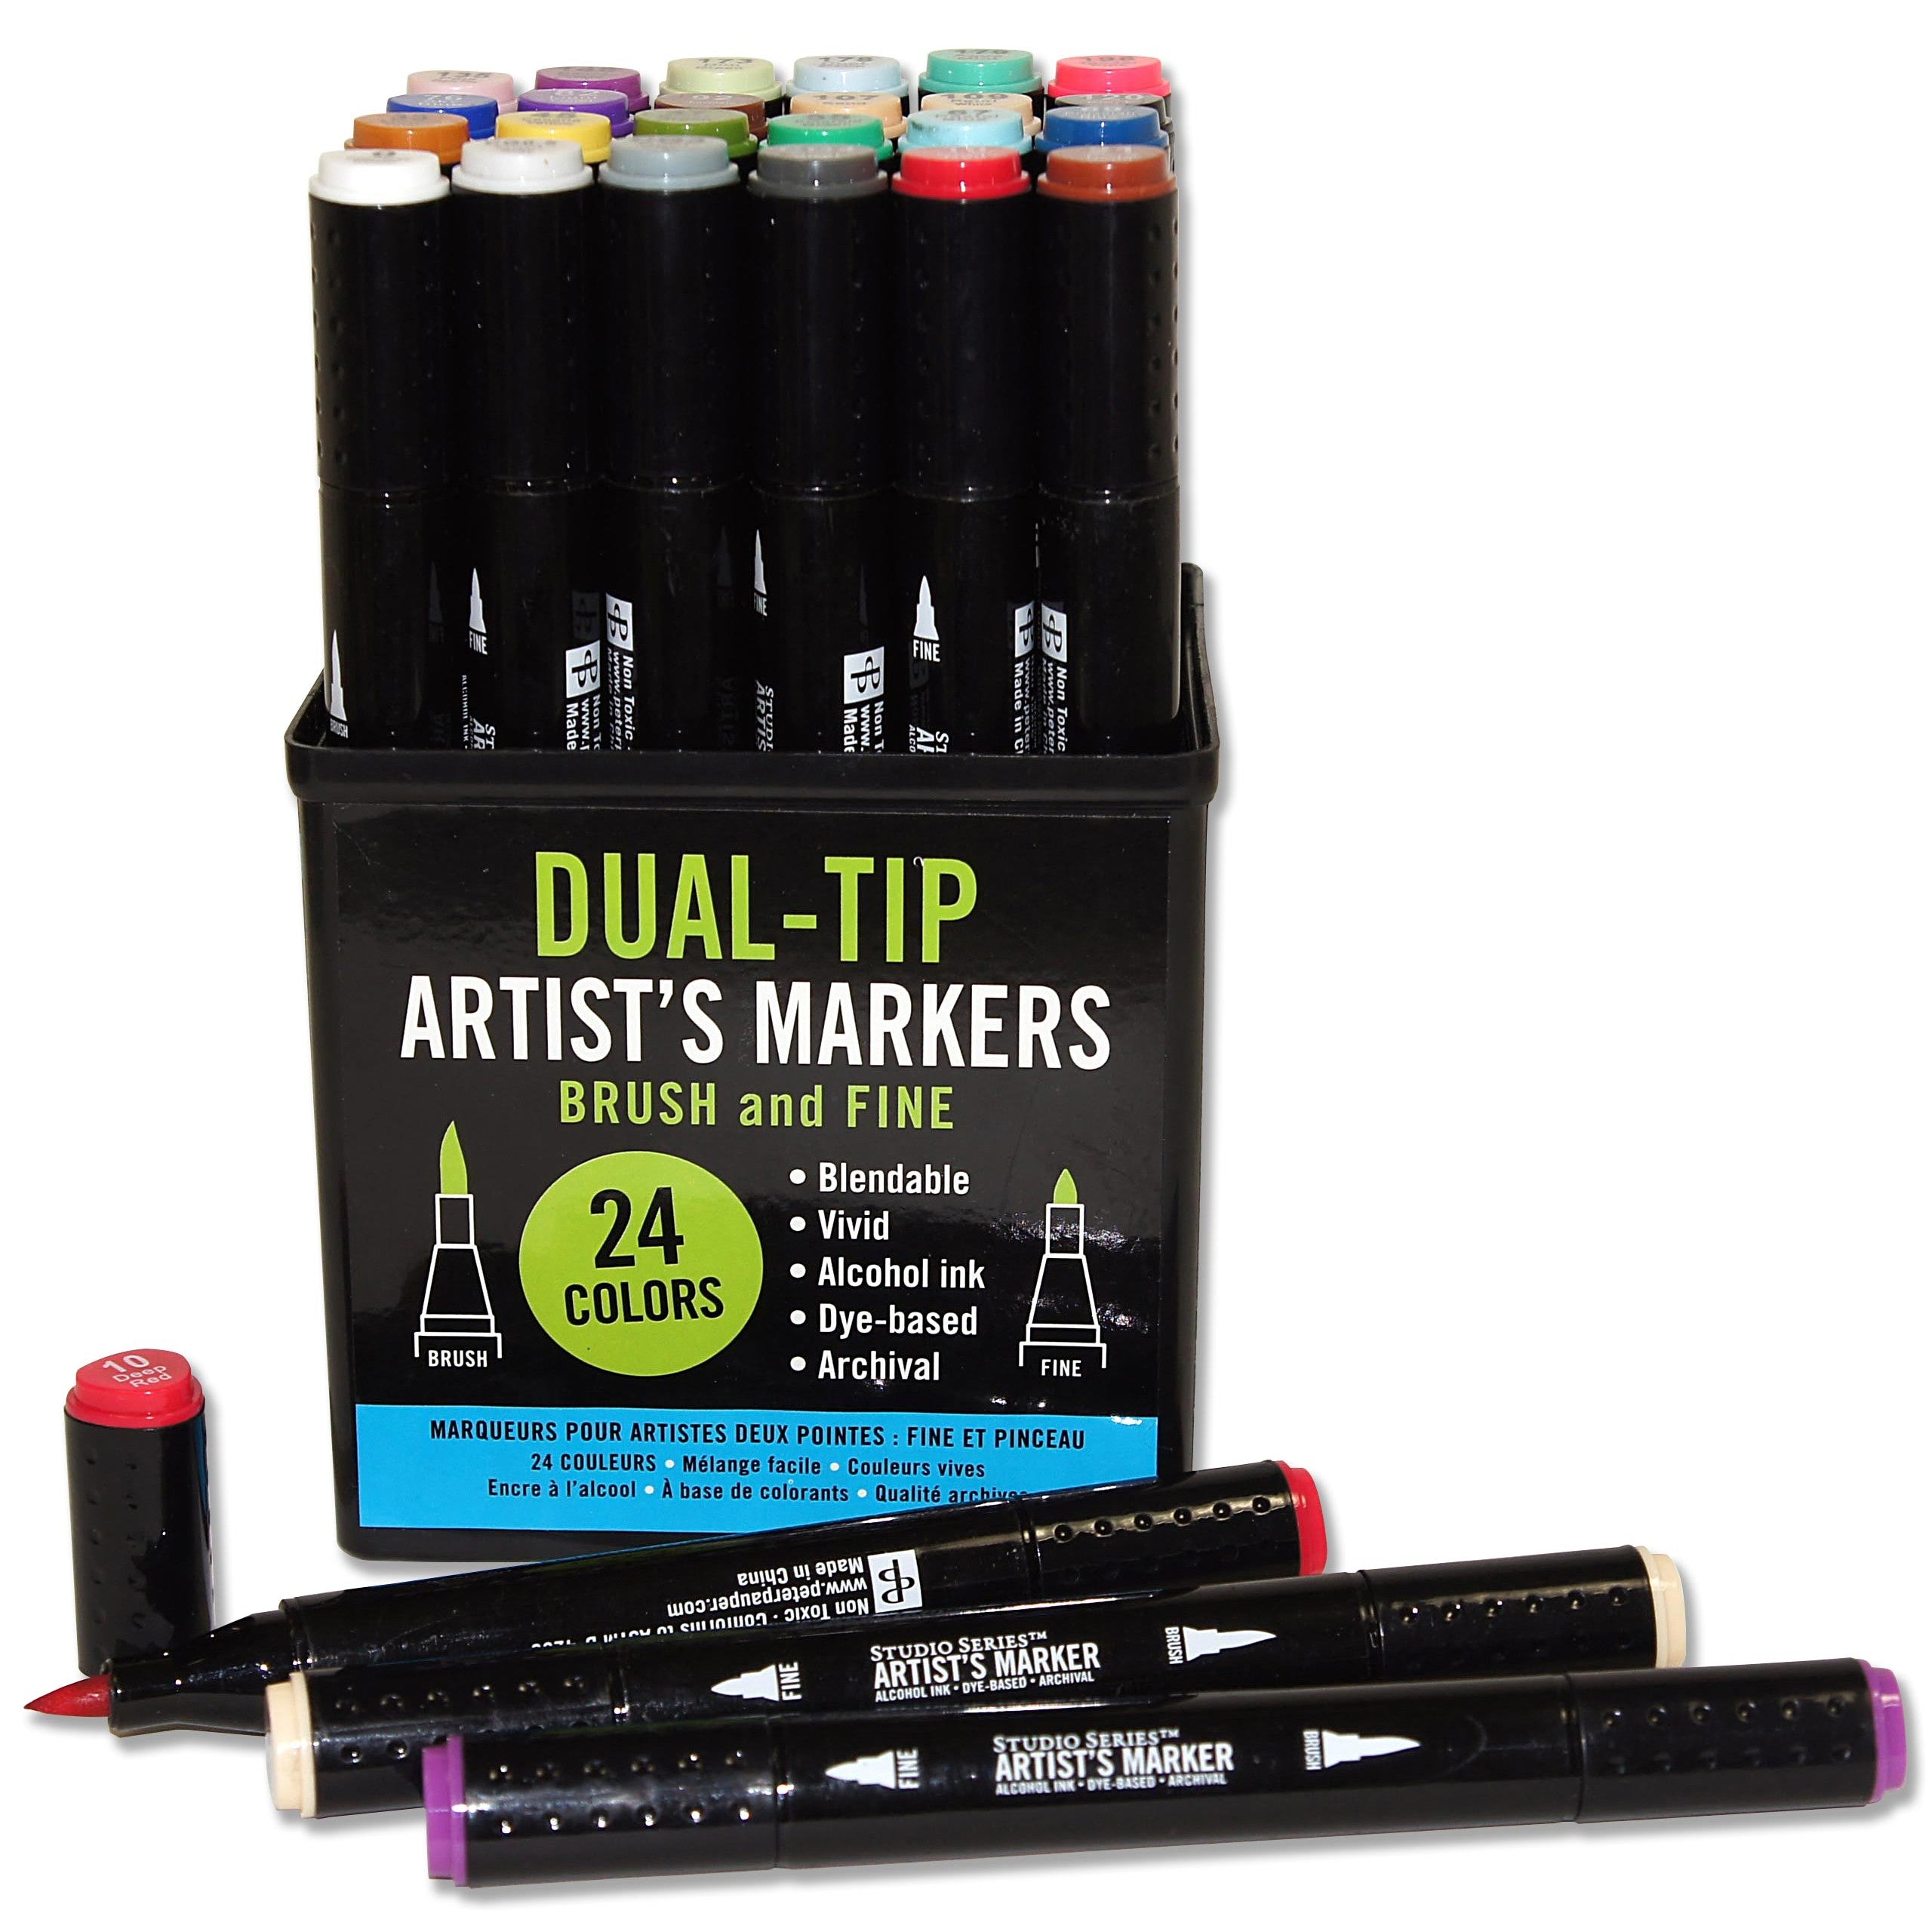 Studio Series Dual-Tip Professional Artist's Markers - Getty Museum Store